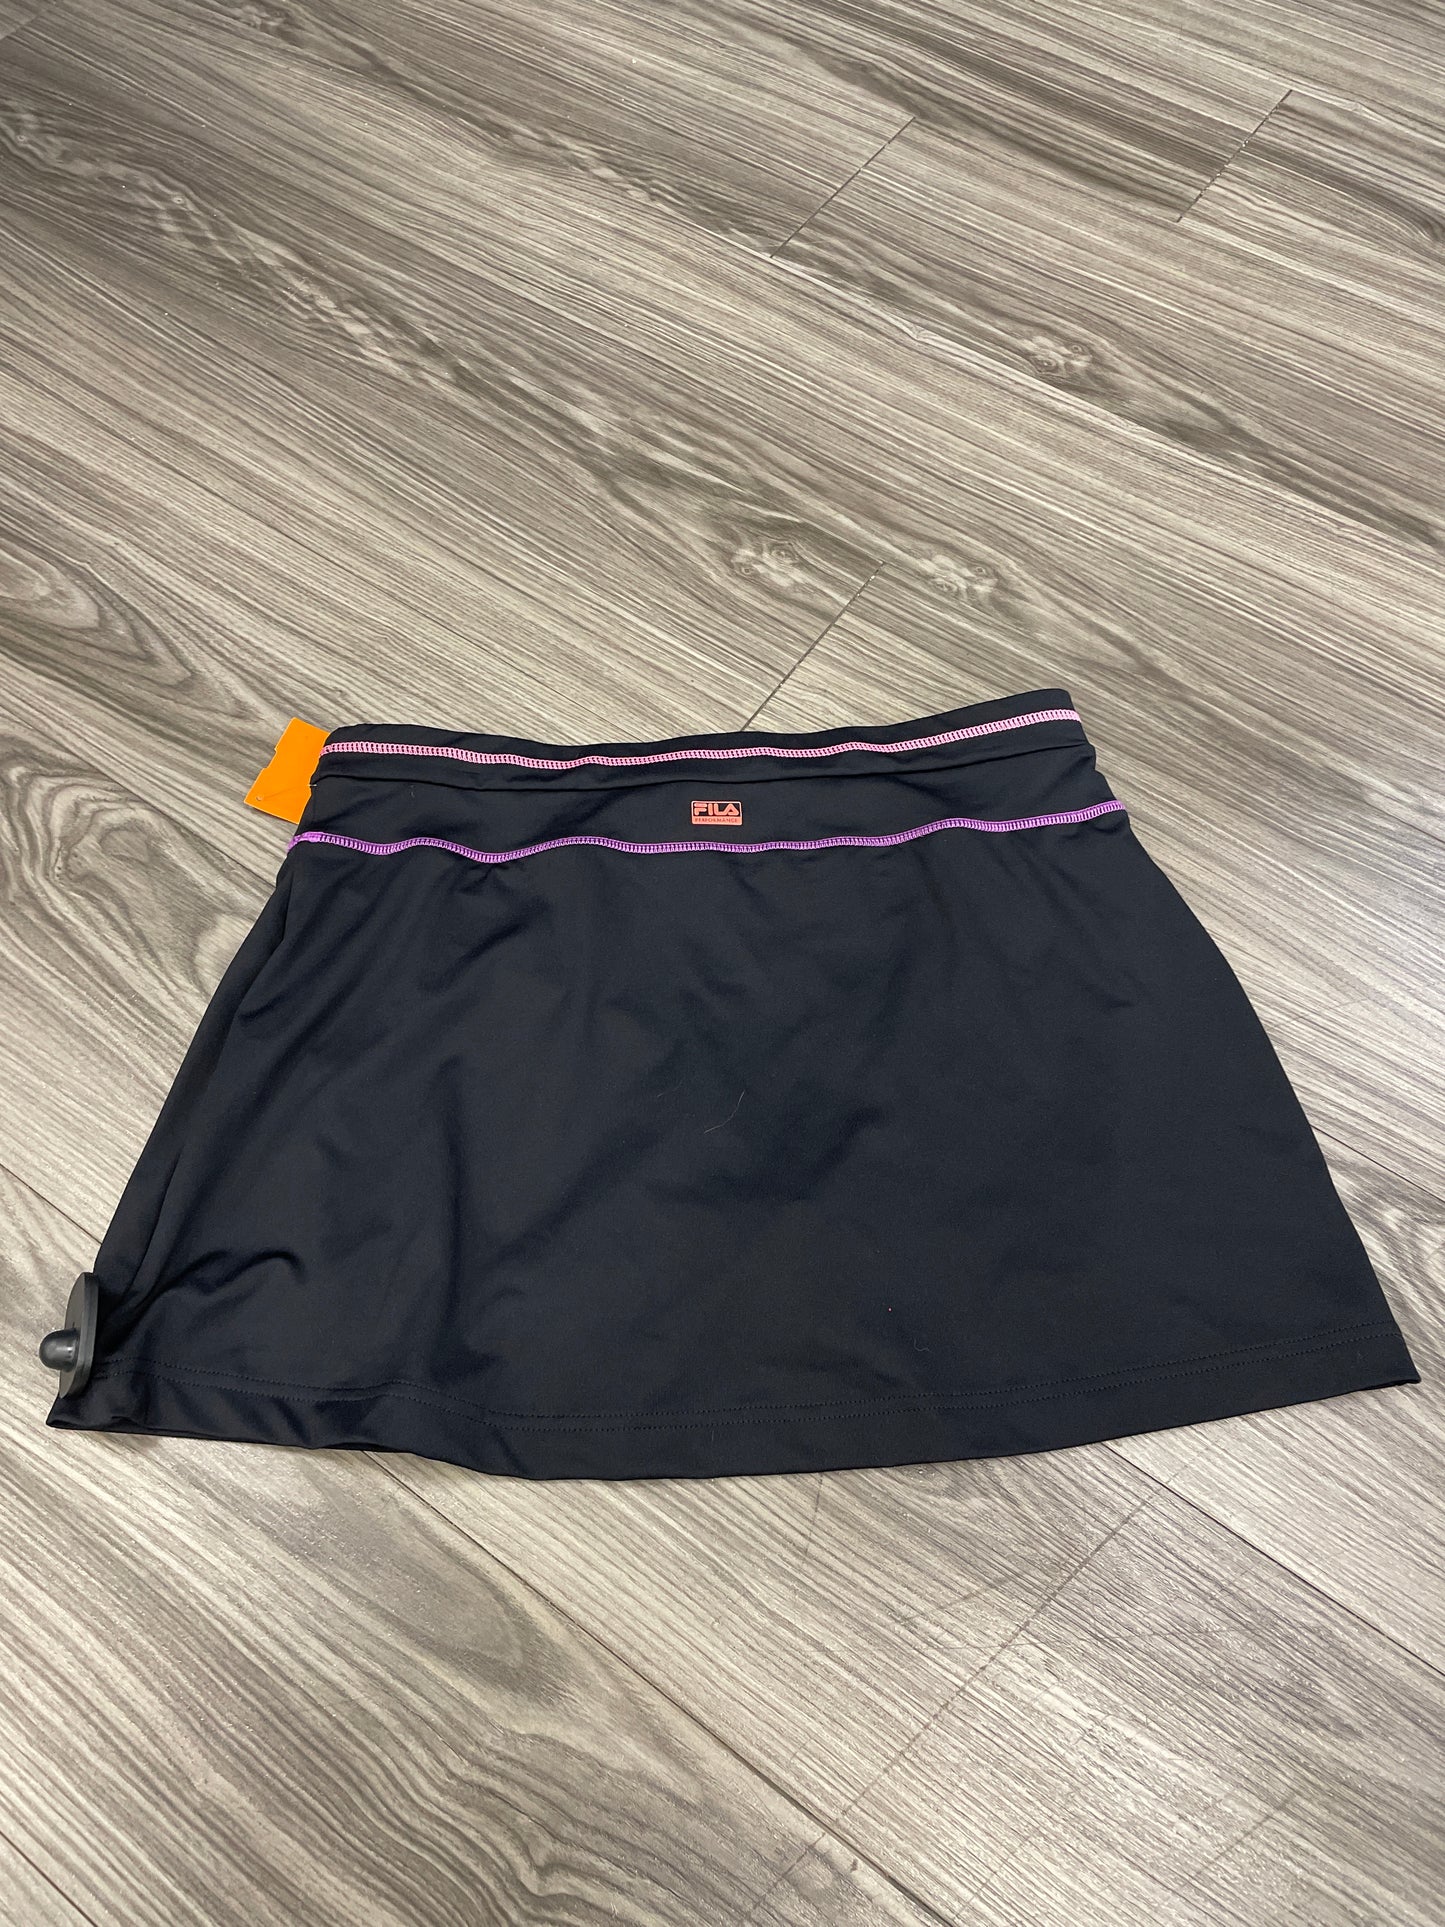 Athletic Skirt By Fila  Size: M